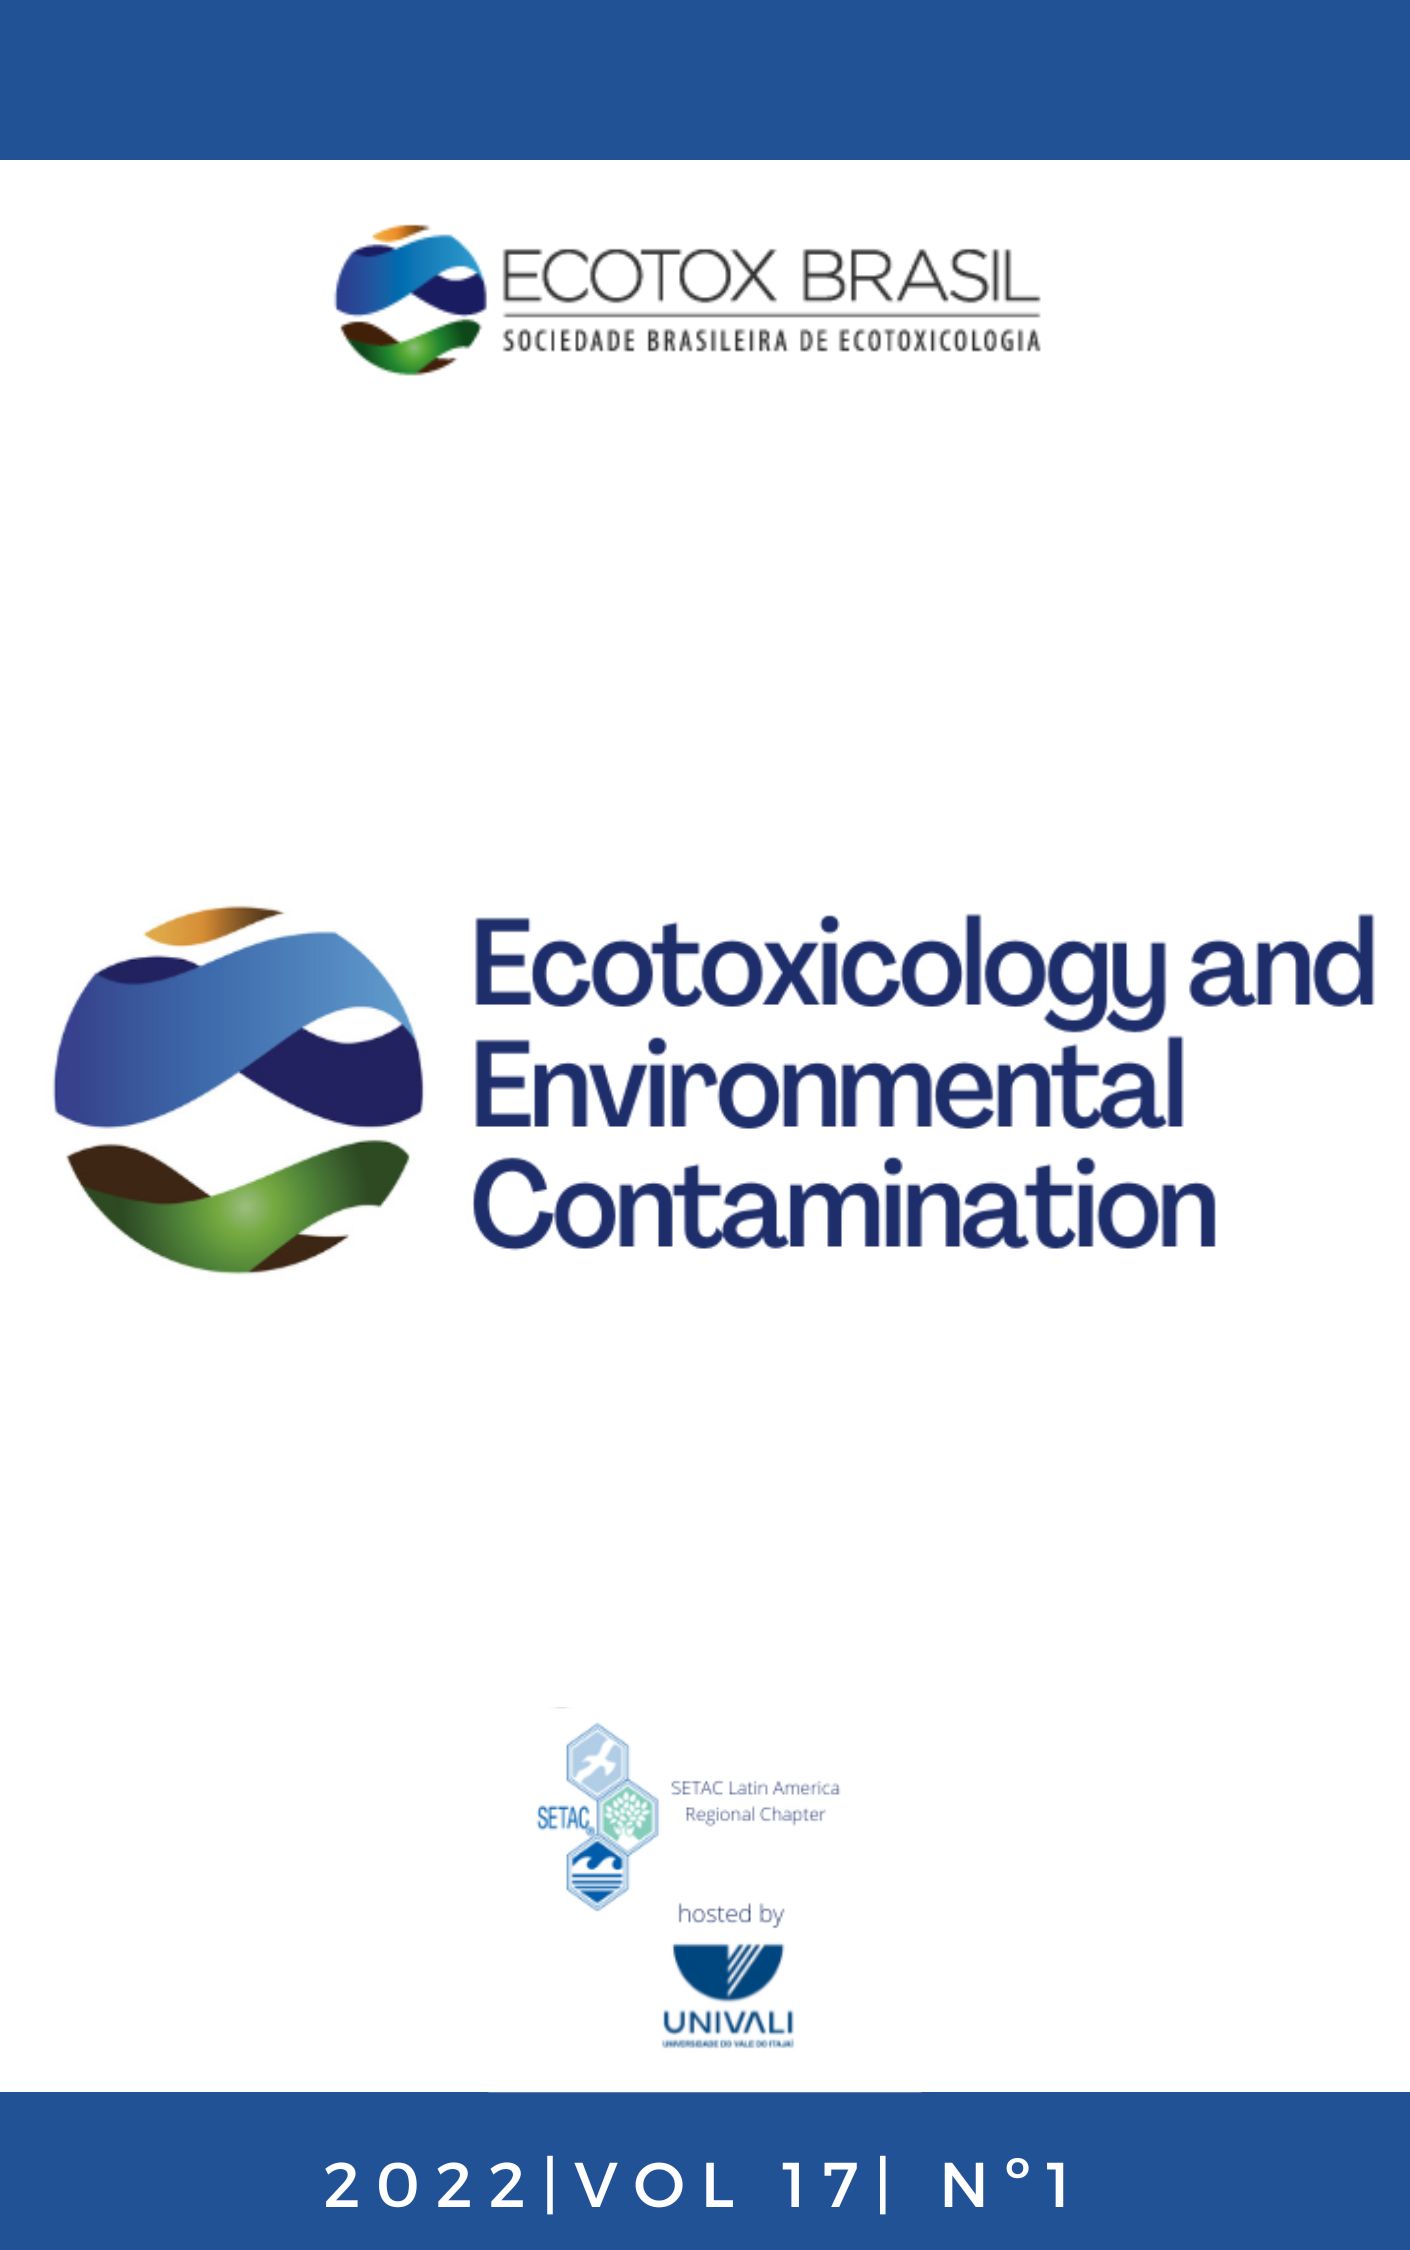 It takes a school [of fish] to avoid an environmental collapse: Zebrafish  as an outstanding alternative animal model in chemical toxicity screening |  Ecotoxicology and Environmental Contamination